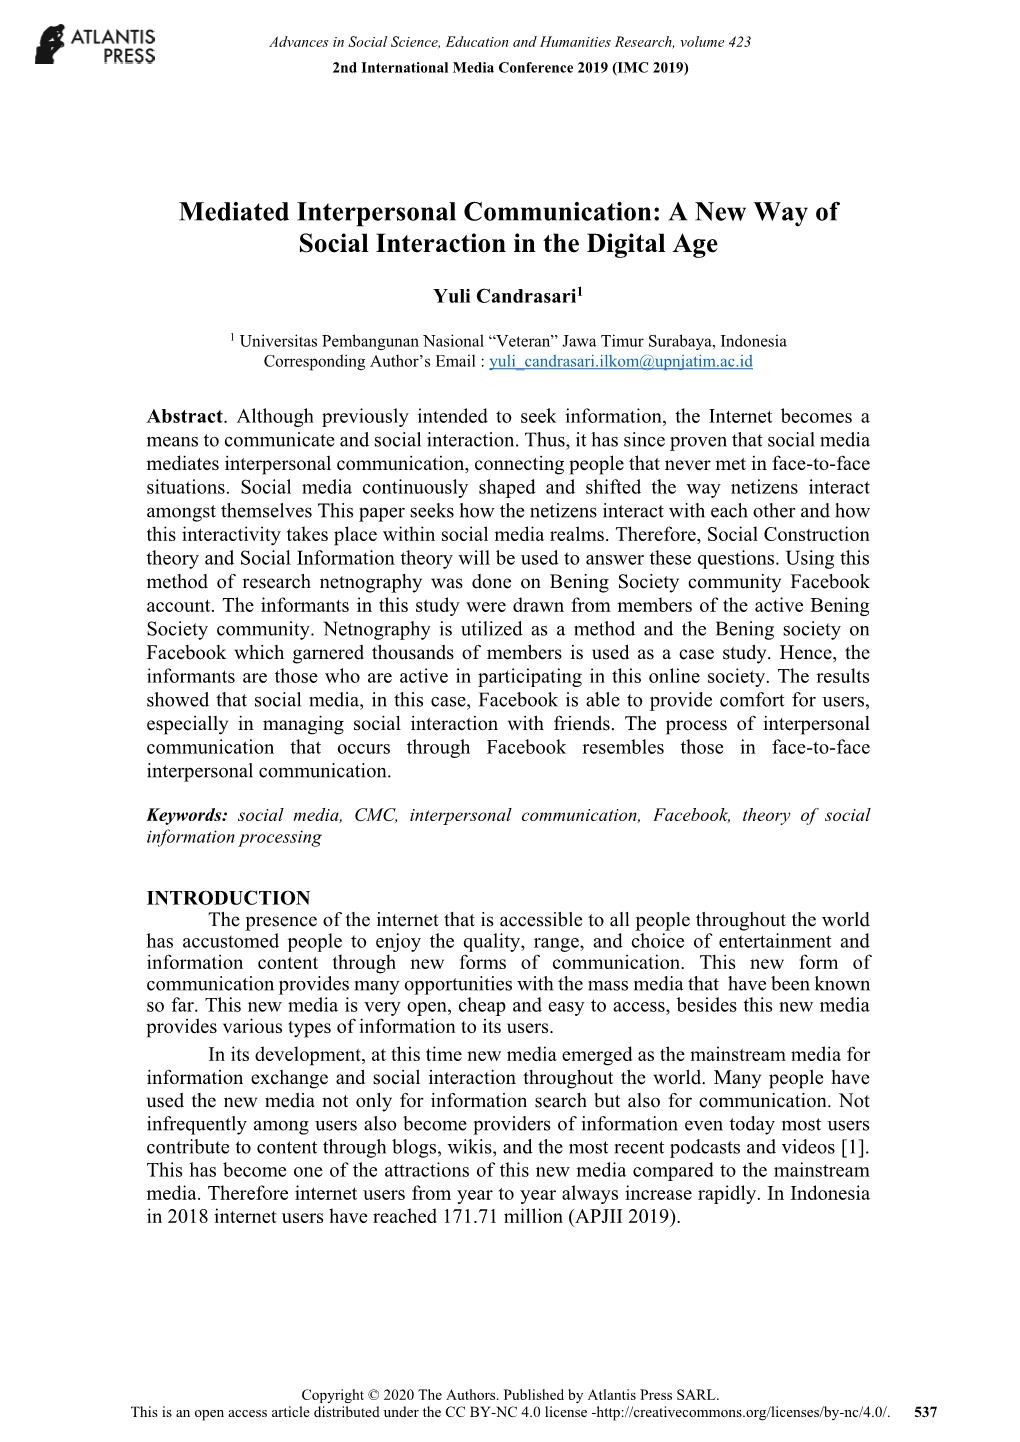 Mediated Interpersonal Communication: a New Way of Social Interaction in the Digital Age